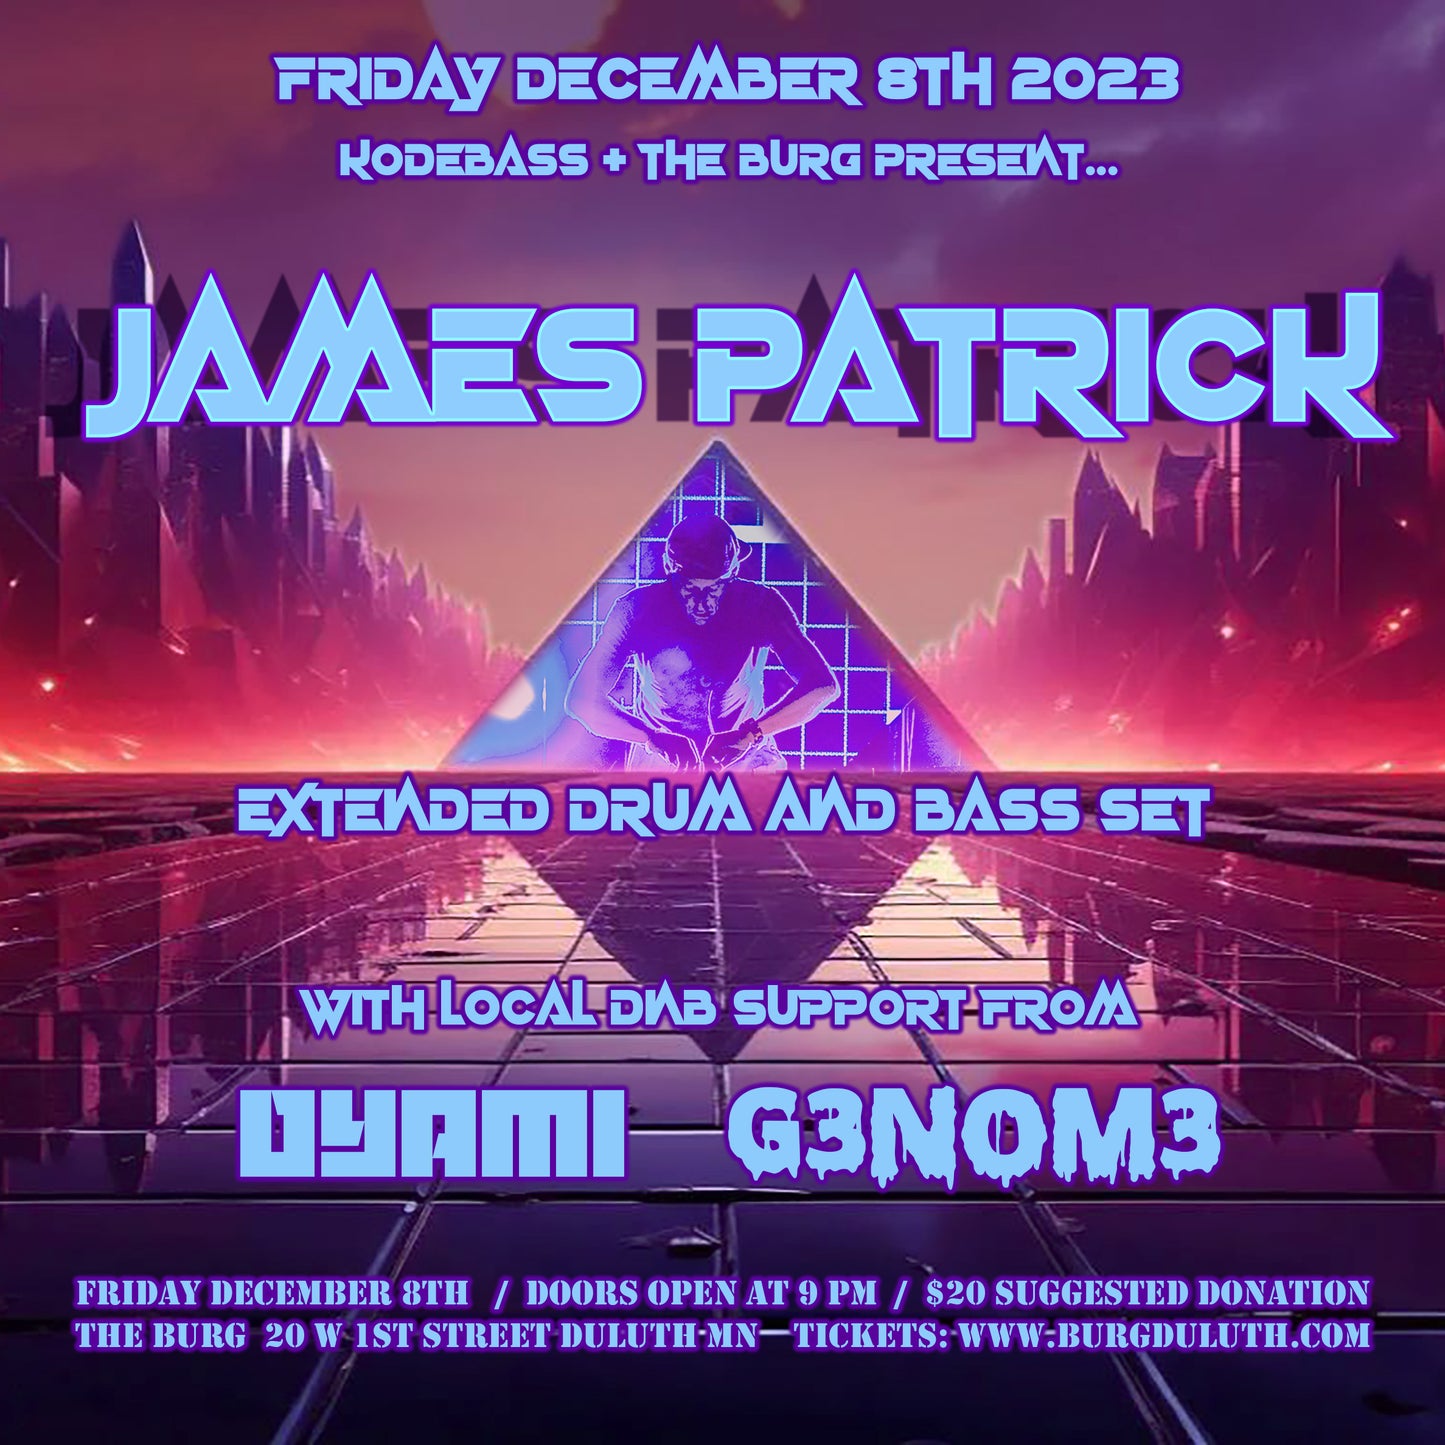 JAMES PATRICK Exclusive Drum & Bass Set  // with local support from DYAMI  +  G3NOM3 Friday December 8th 9PM